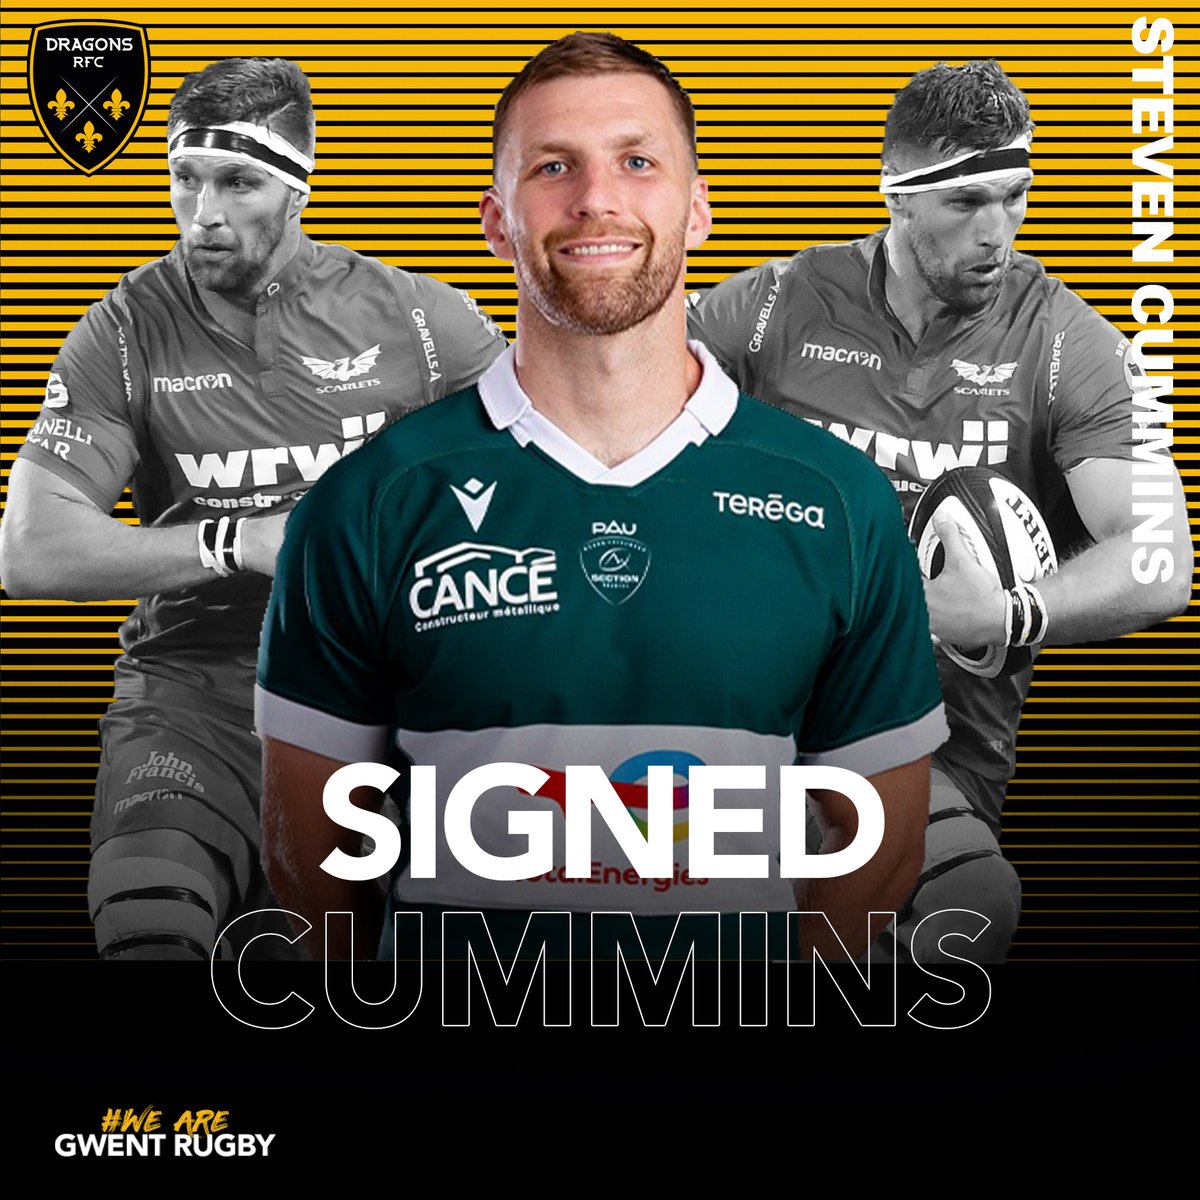 🚨 𝘿𝙍𝘼𝙂𝙊𝙉𝙎 𝙎𝙄𝙂𝙉 𝘾𝙐𝙈𝙈𝙄𝙉𝙎 ✍️

Dragons RFC are delighted to announce the signing of giant lock Steve Cummins on a multi-year deal from @SectionPaloise ahead of the 2024/25 season! 💪🙌

Welcome Steve ❤️🐉

#WeAreGwentRugby